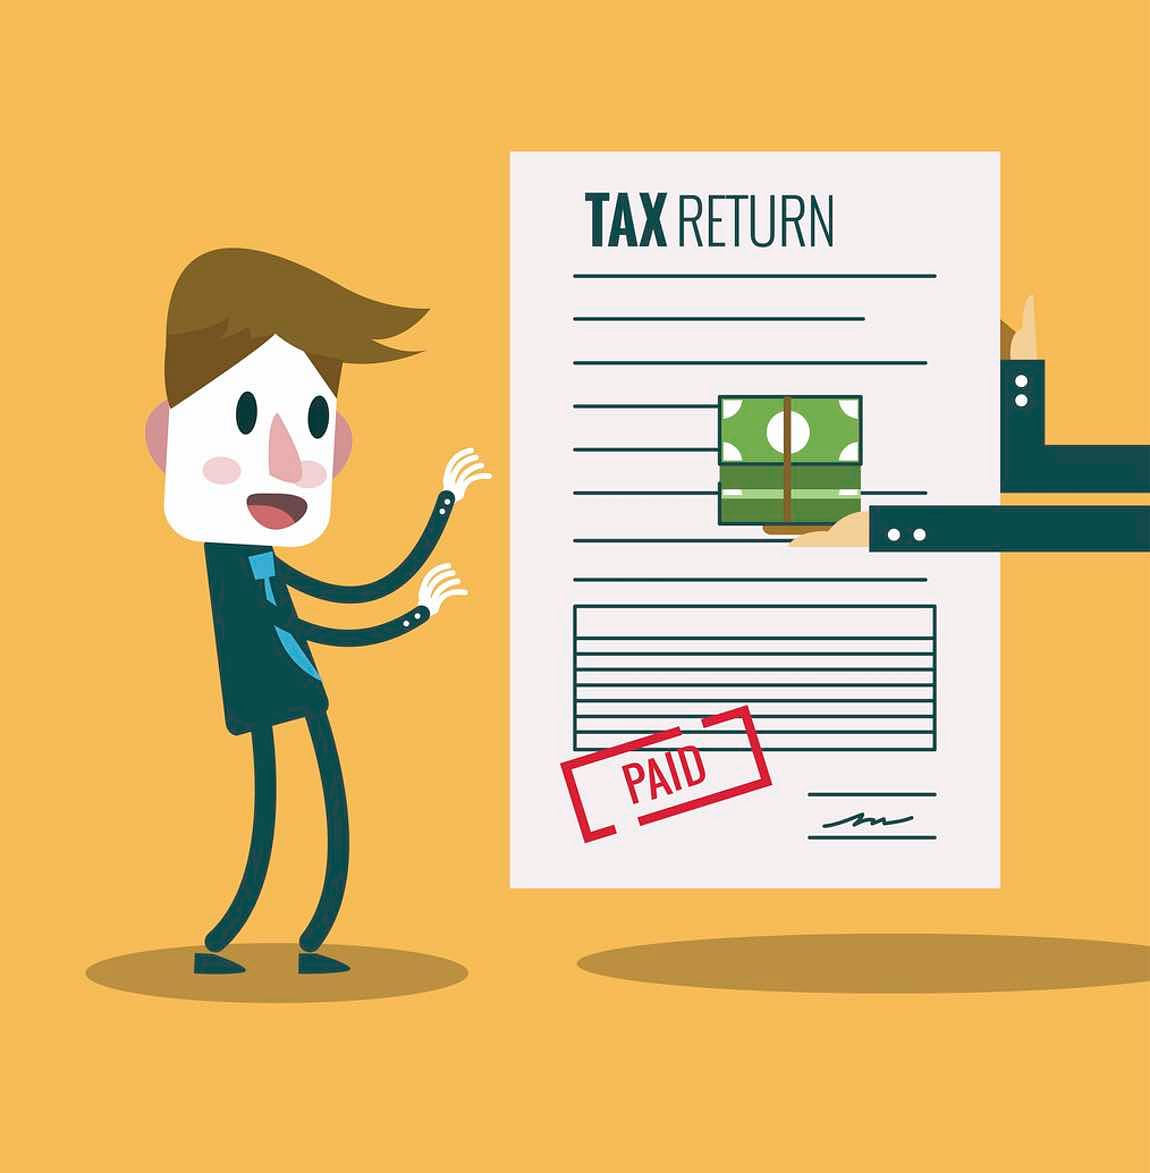 The regulations can be split into rules for filing income tax returns and rules for calculating income tax.